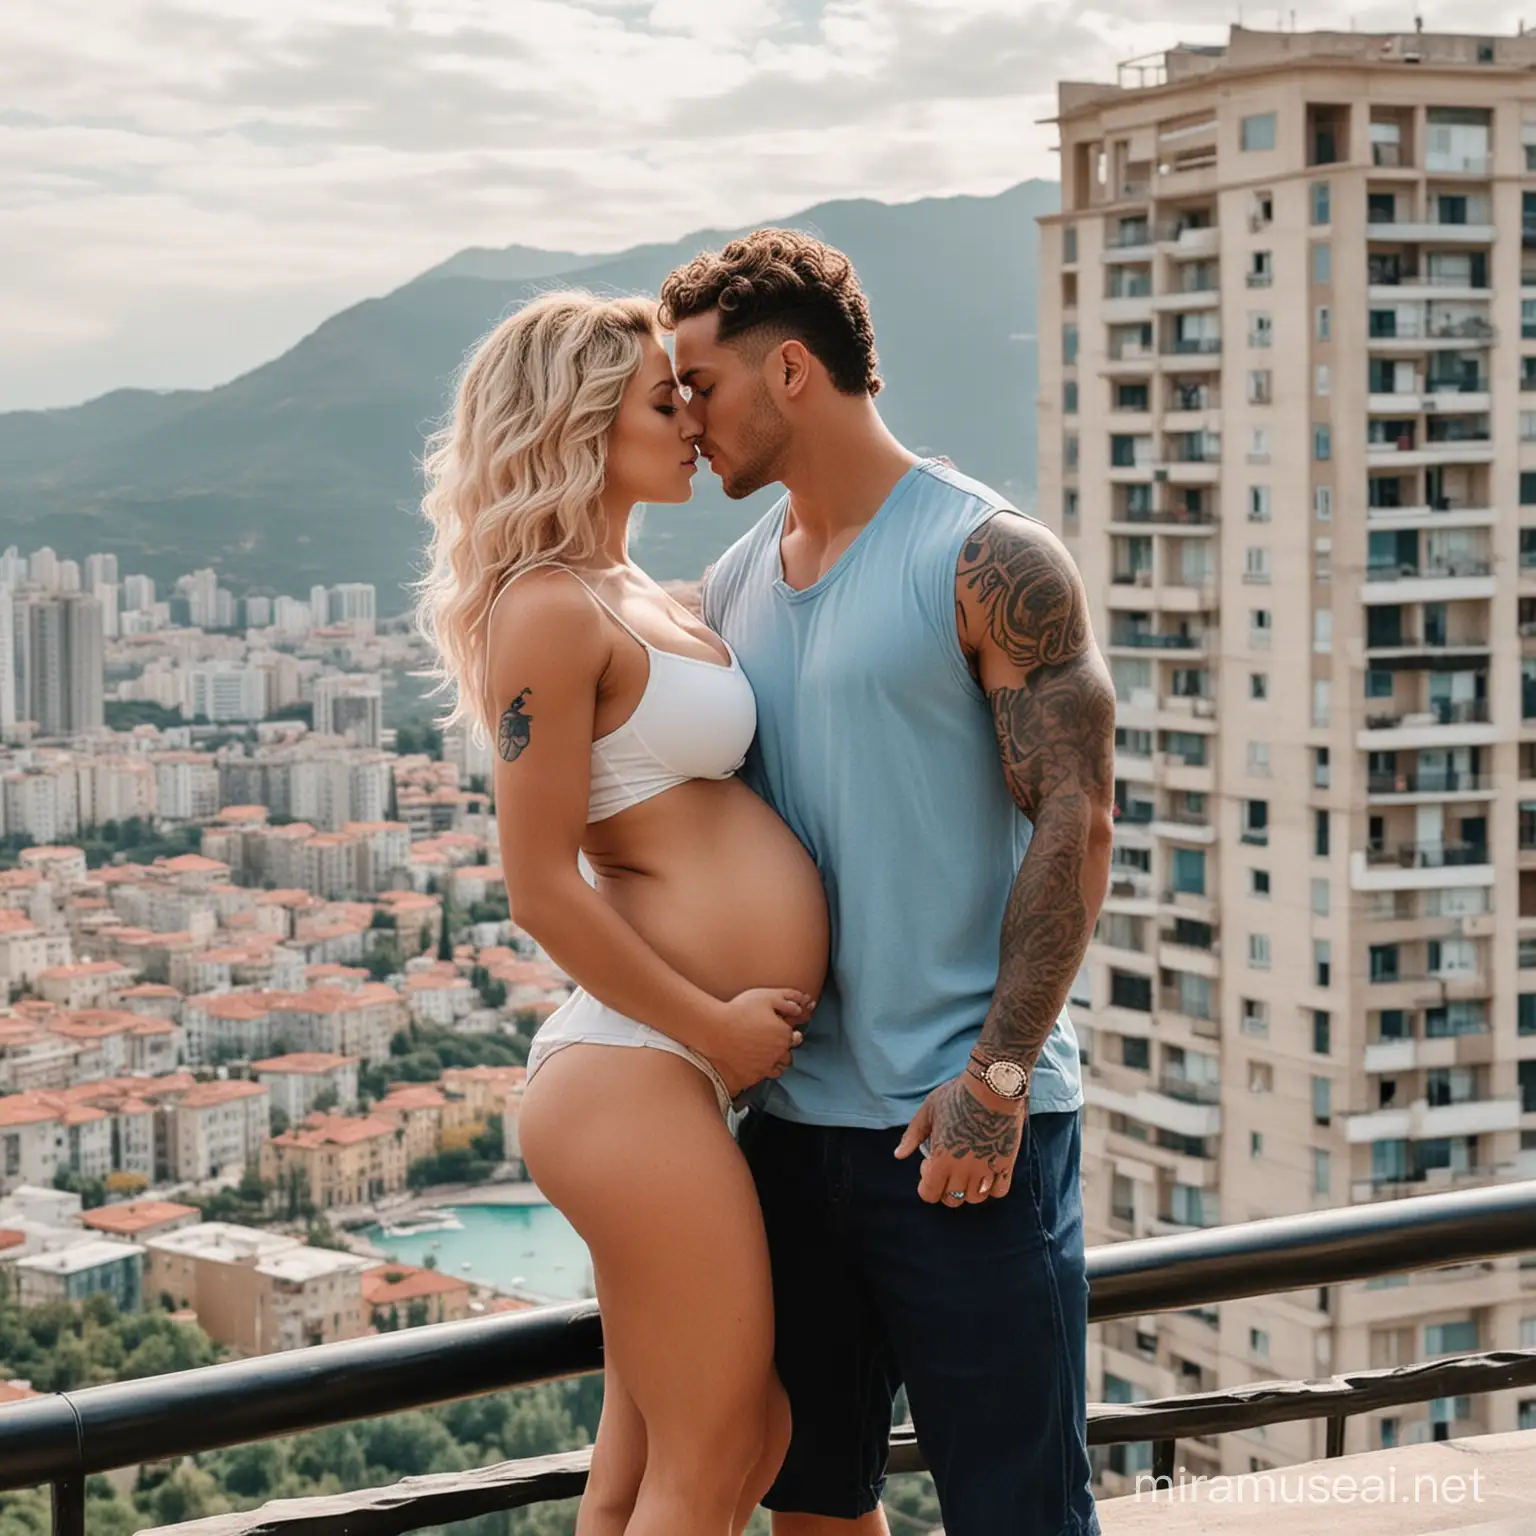 Muscular Football Player Embraces Pregnant Royalty in Luxurious Mountain Villa